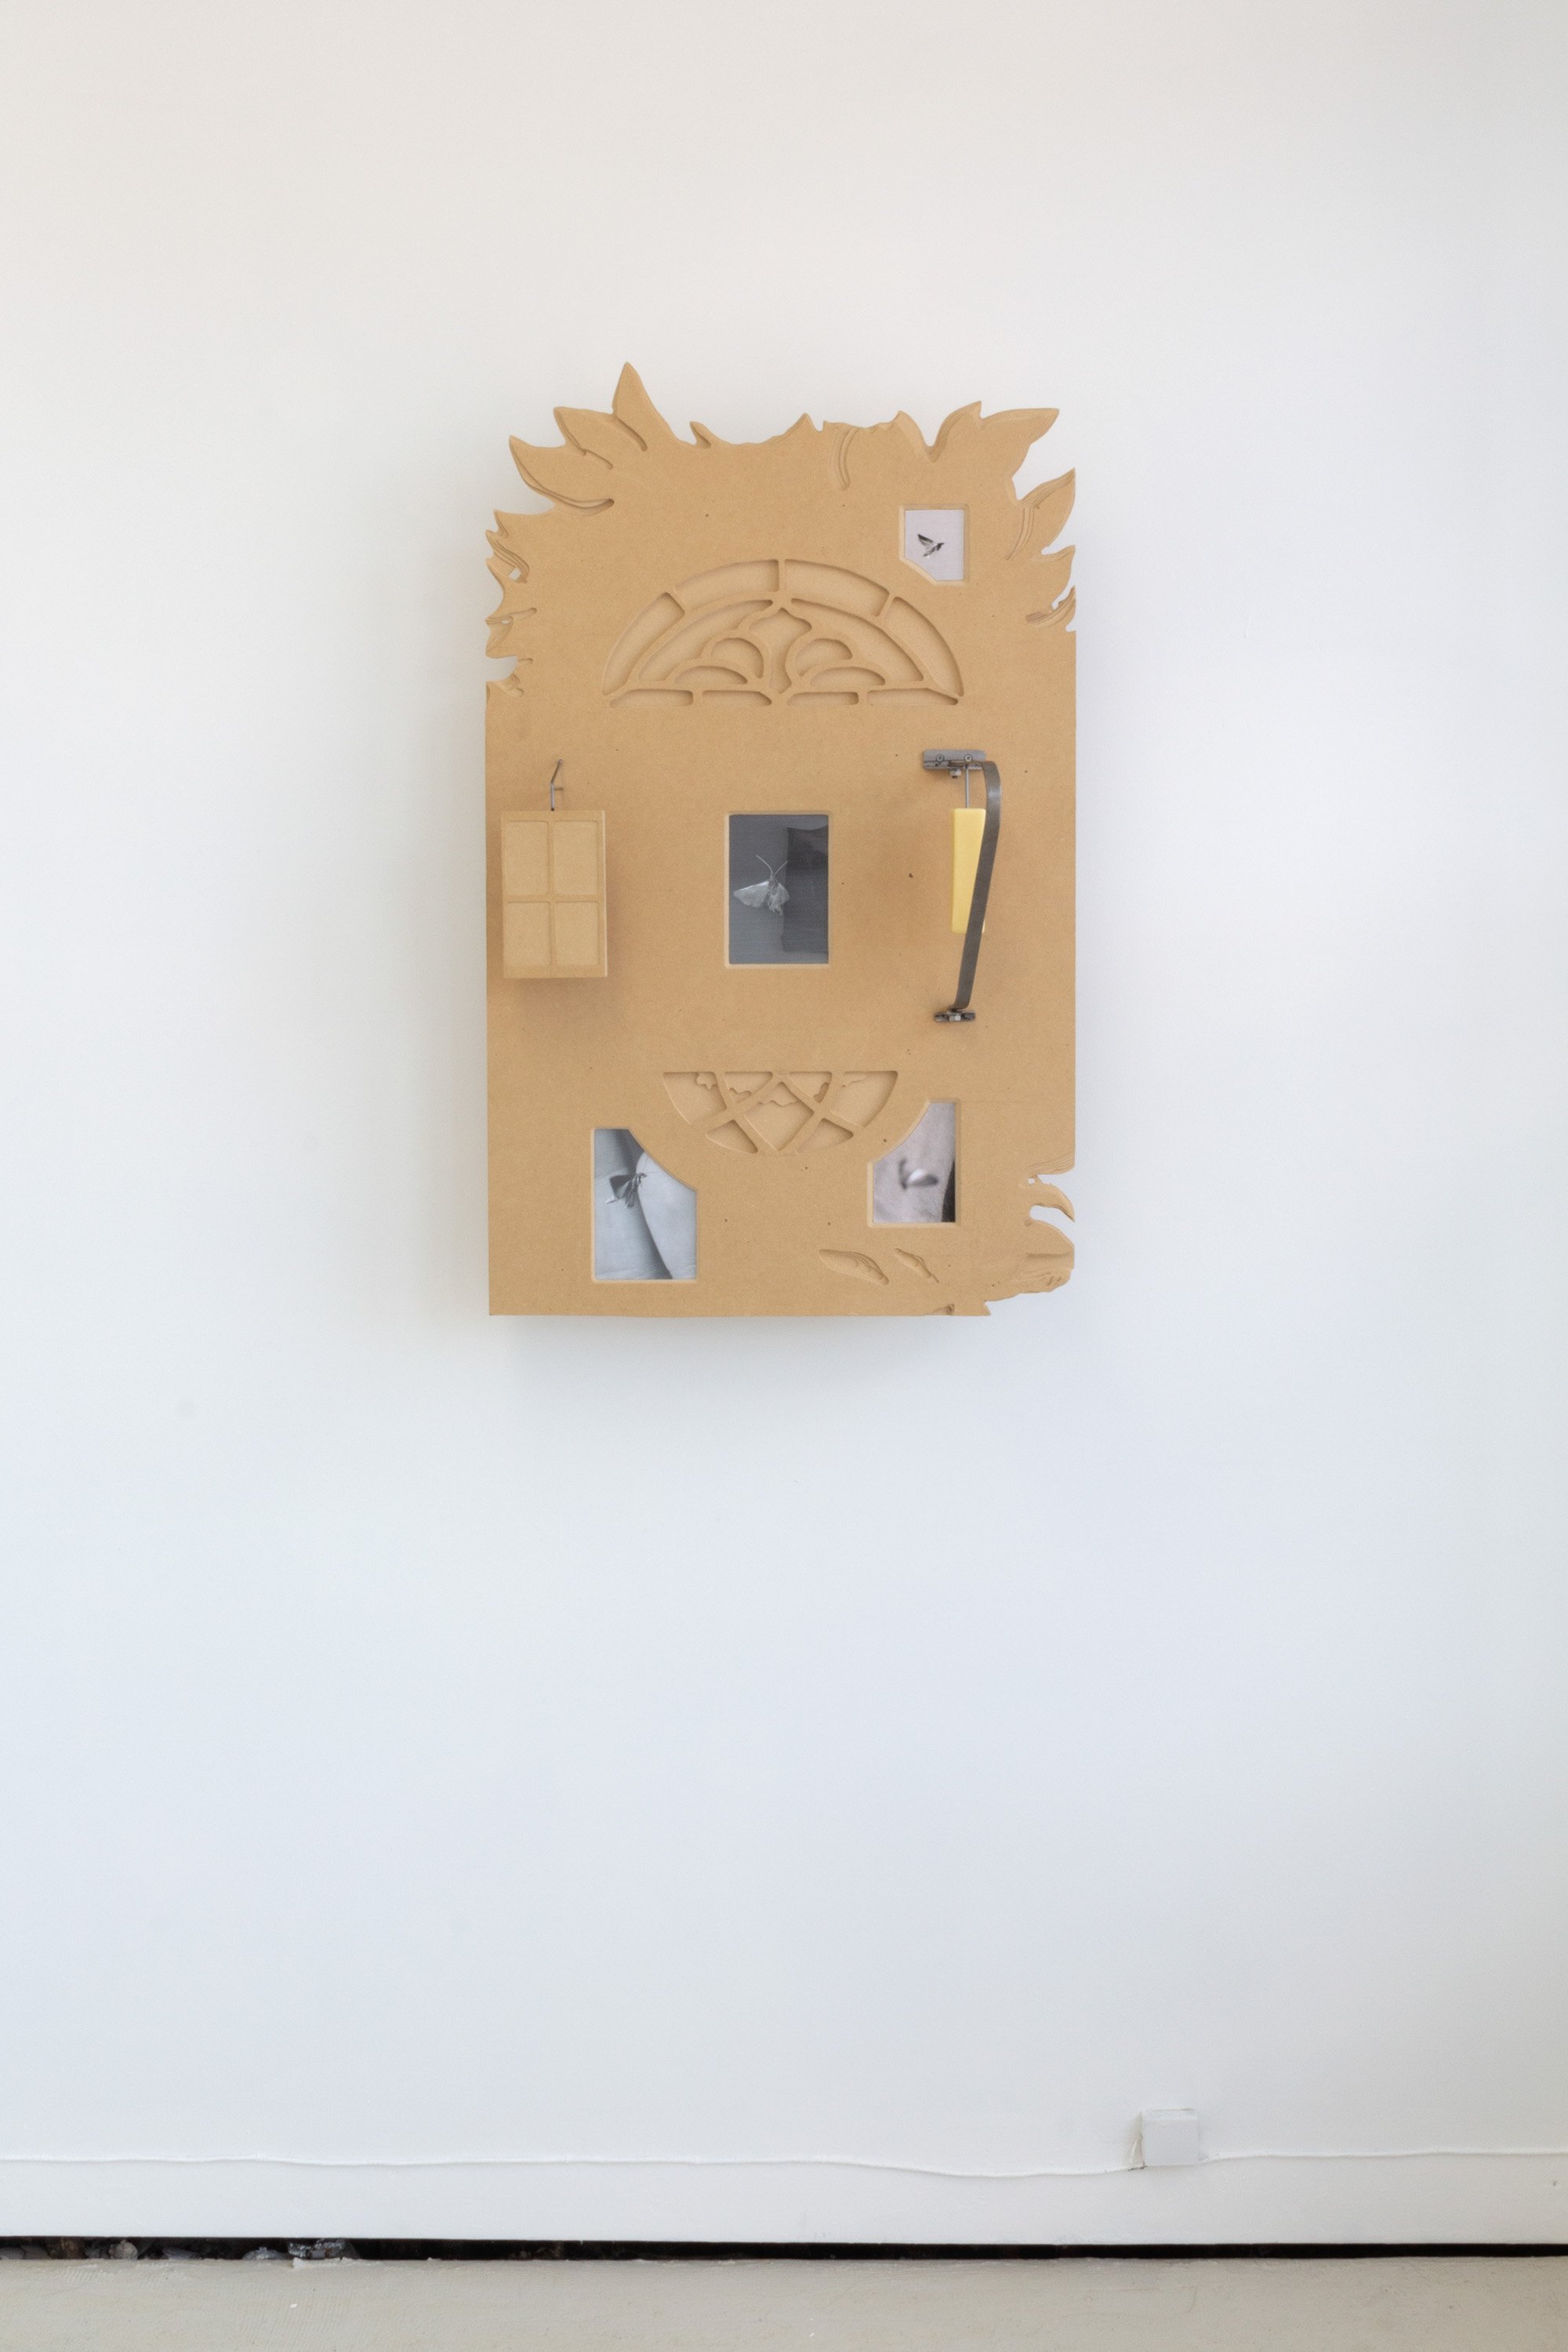  Bradley Marshall  An Imperfect Offering, A Windowless Room (Skeeeedaddle!) , 2021 Hand-cut MDF, inkjet print, steel, wax, tin can, pencil with lead replaced with steel, hardware, and adhesives 26 x 36.5 x 8 in 